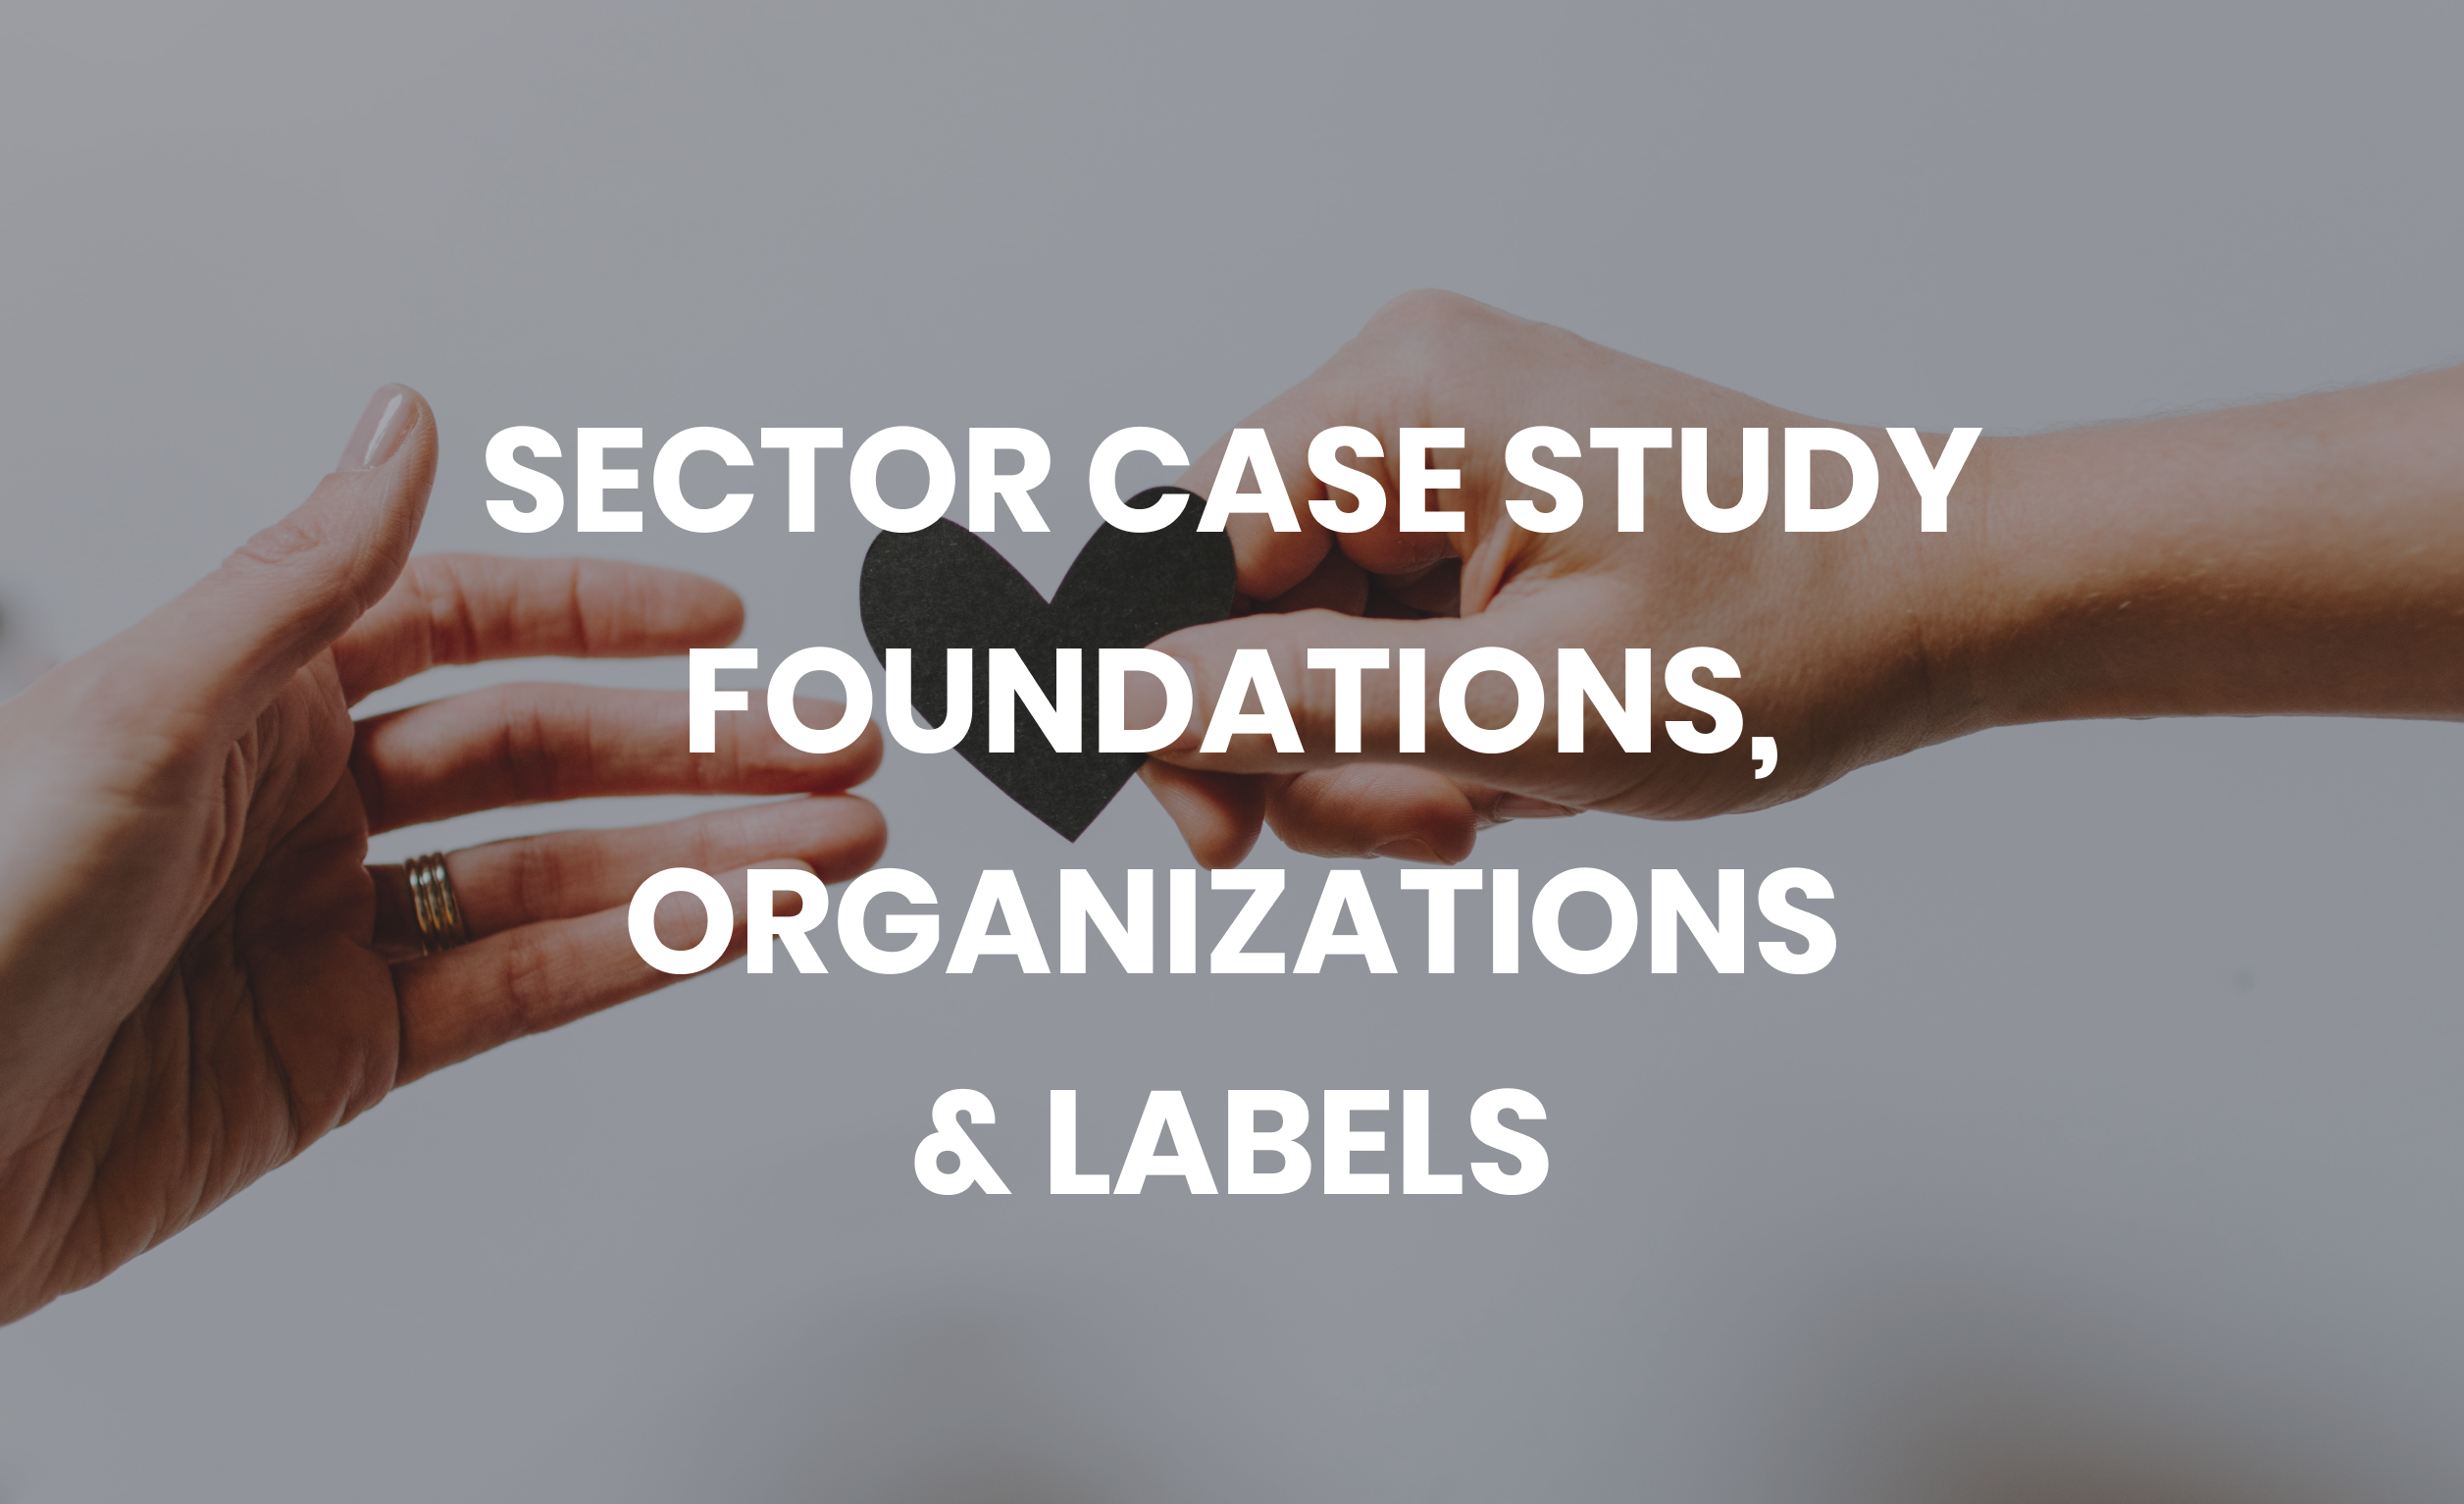 Sector Case Study Foundations, Organizations & Labels